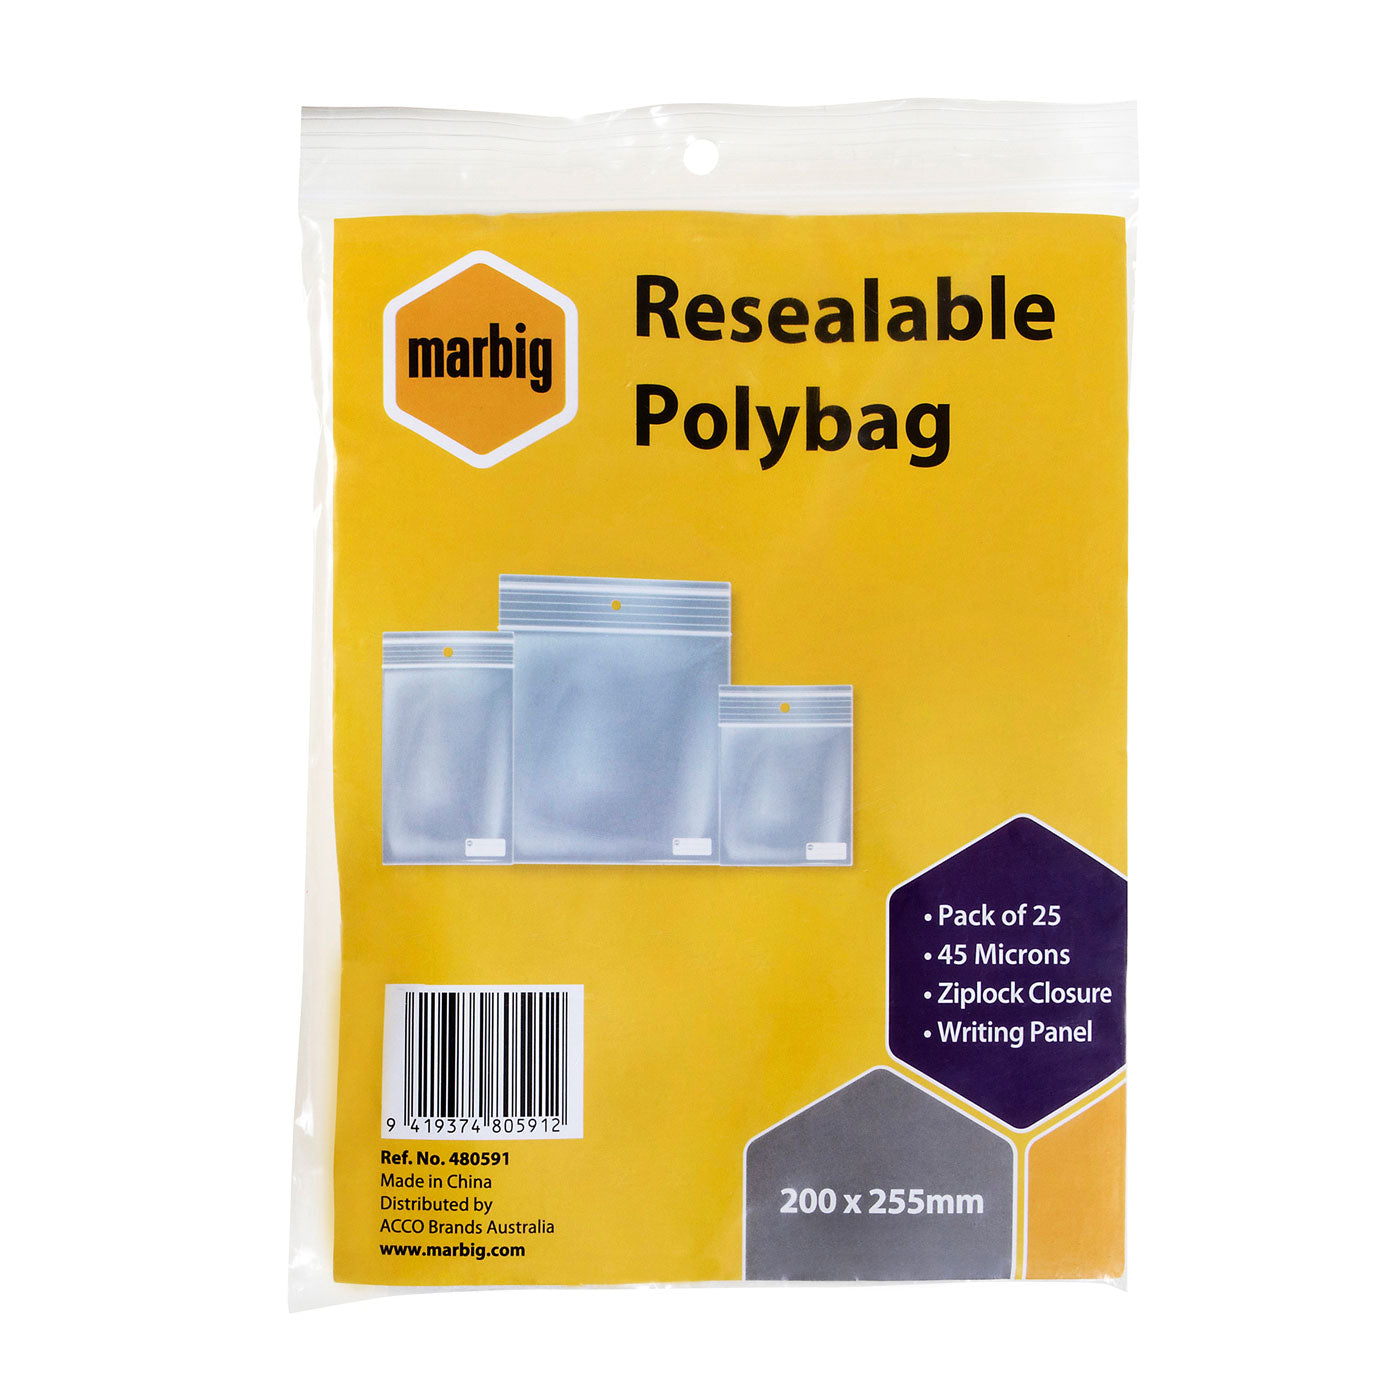 Marbig Resealable Polybag Zip Lock 200 x 255mm Writing Panel Pack of 25